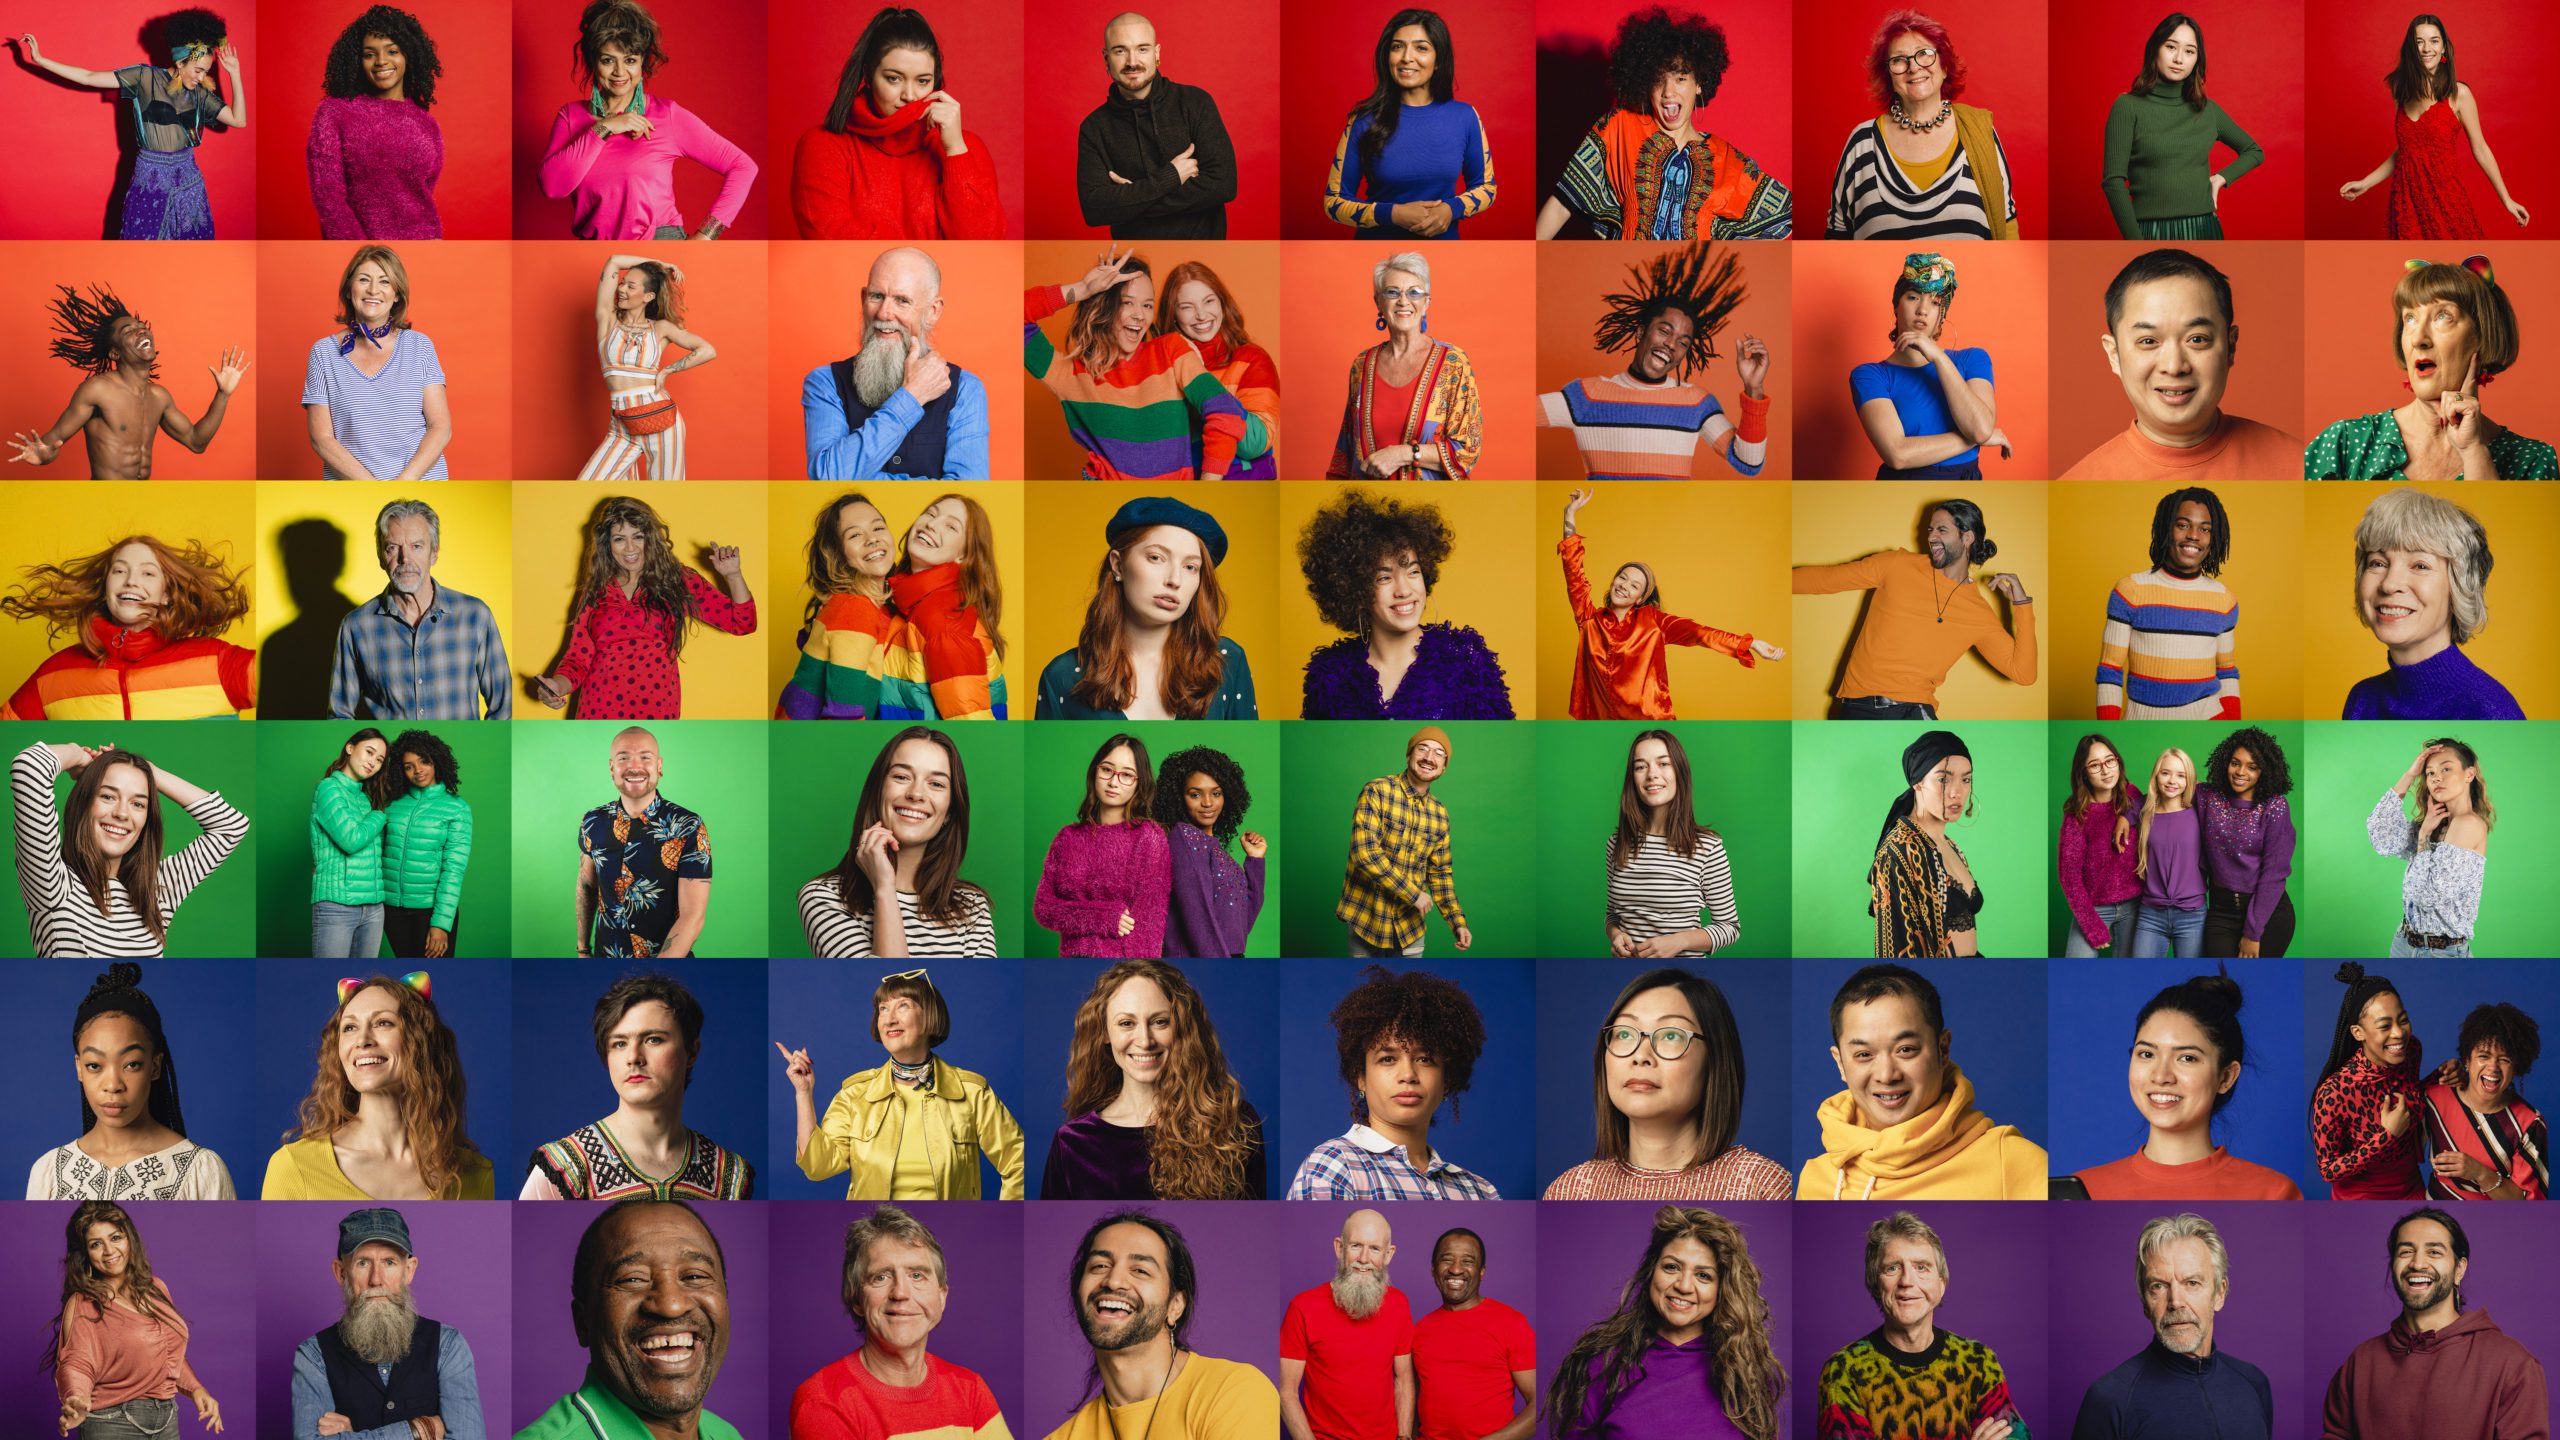 A collage of diverse individuals posing against colorful backgrounds.